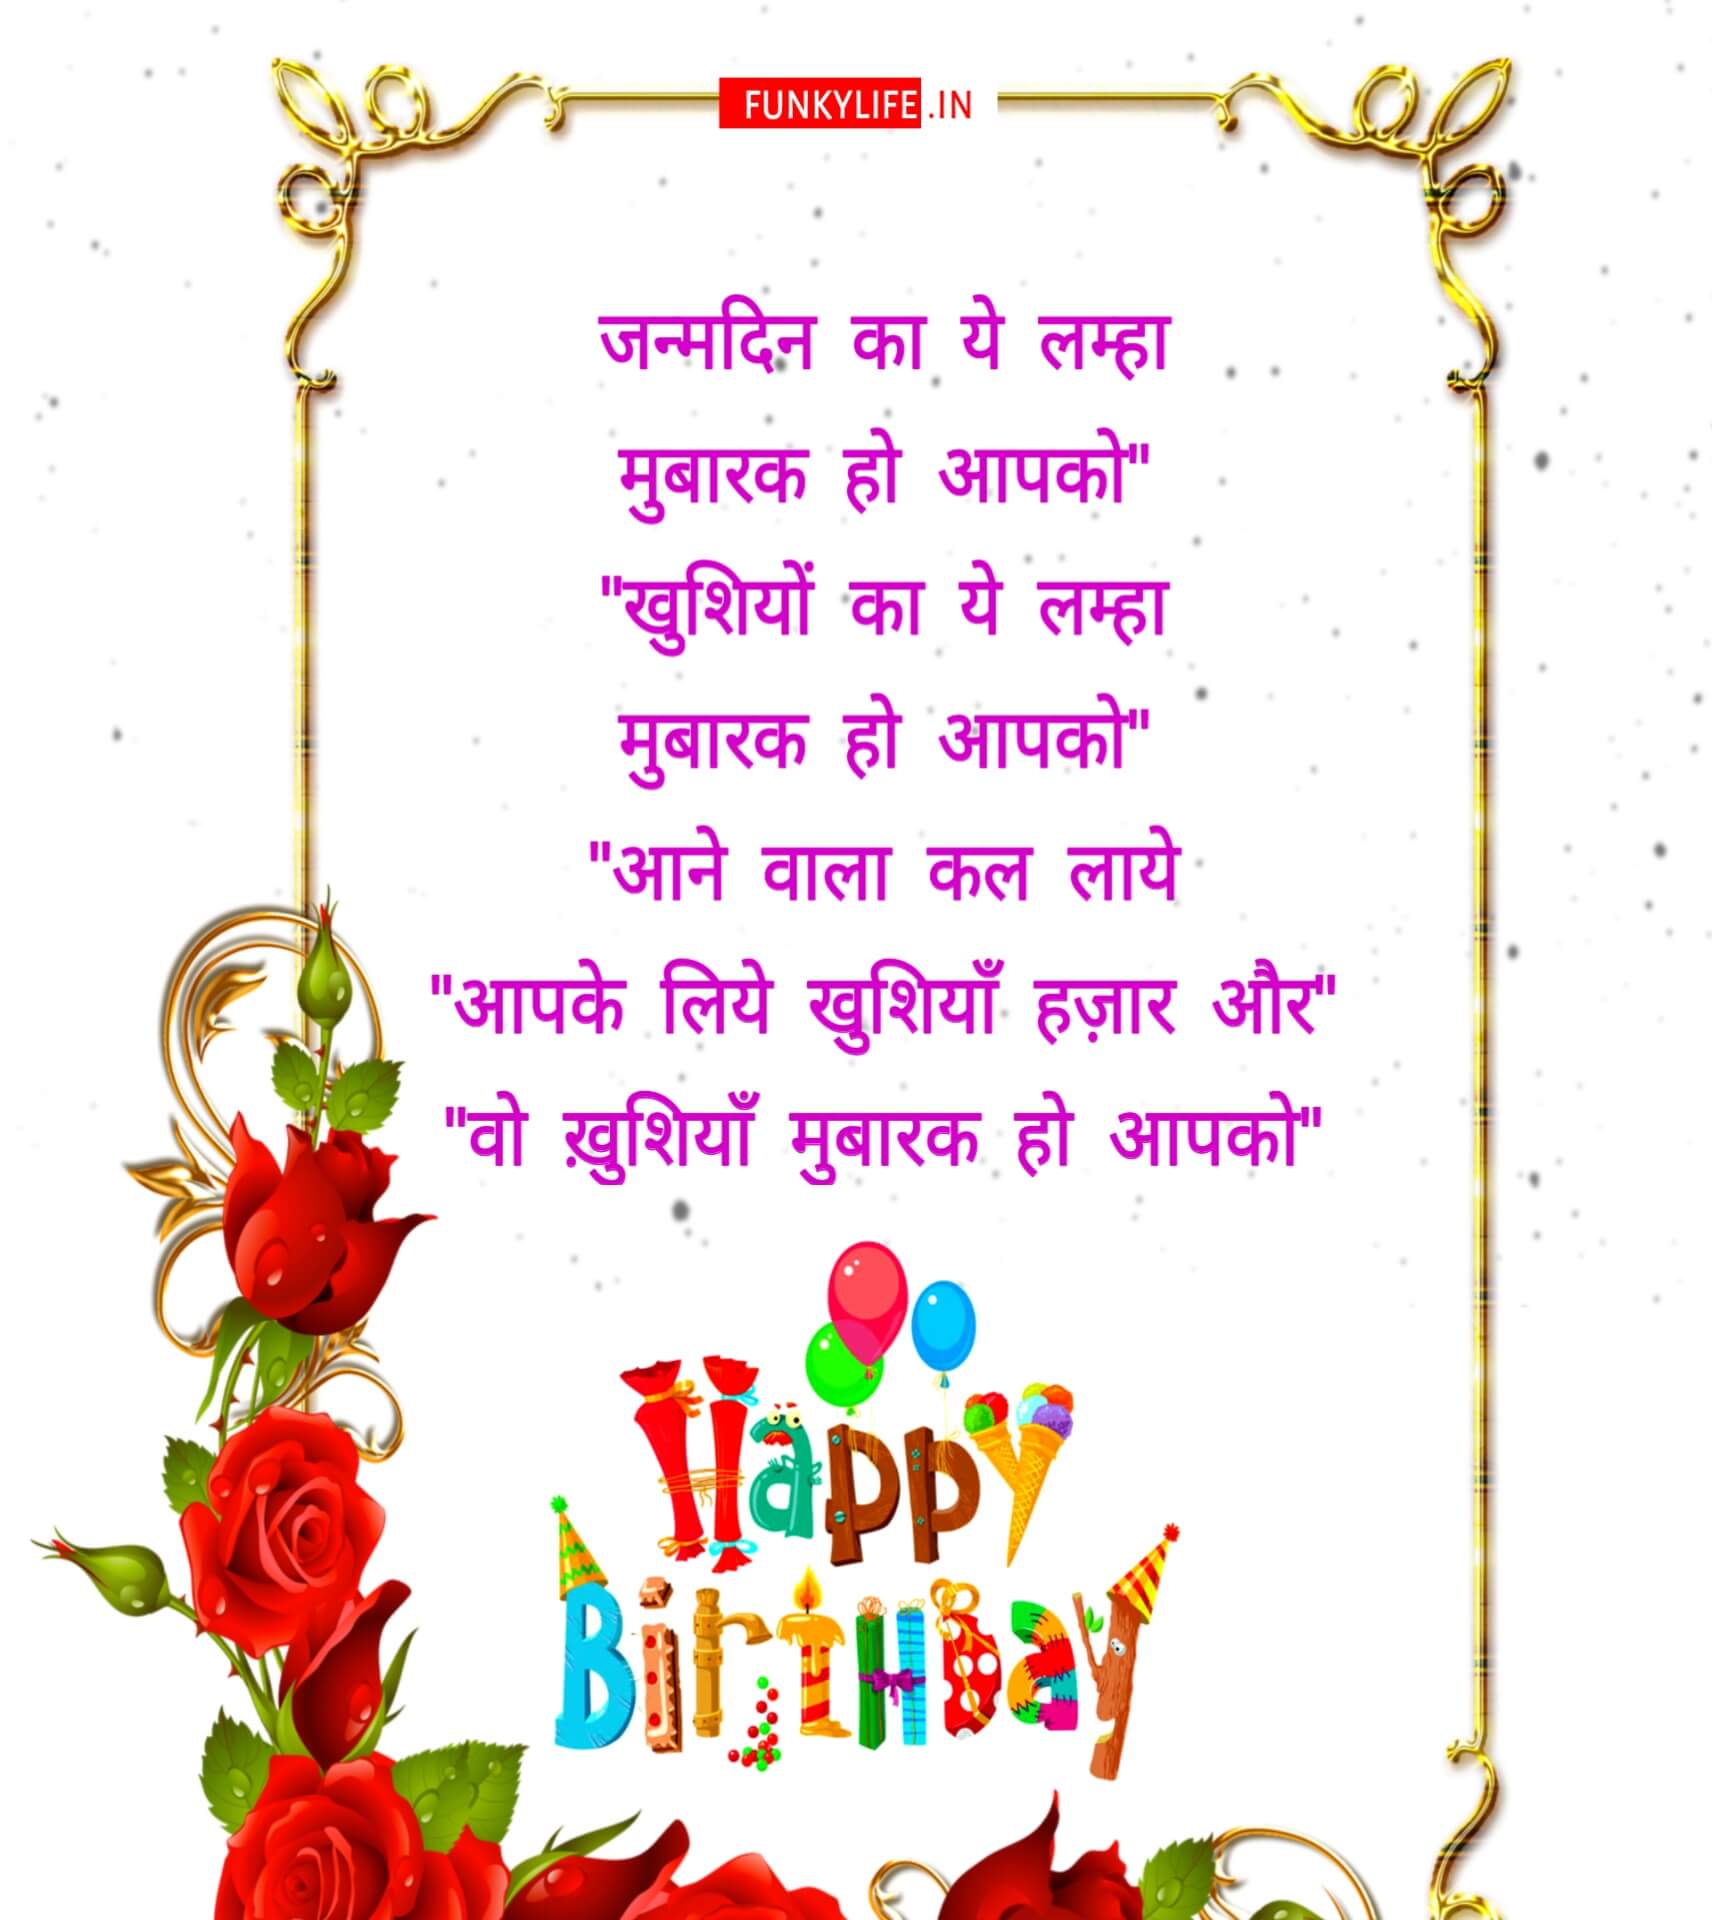 Happy Birthday Wishes in Hindi with Images